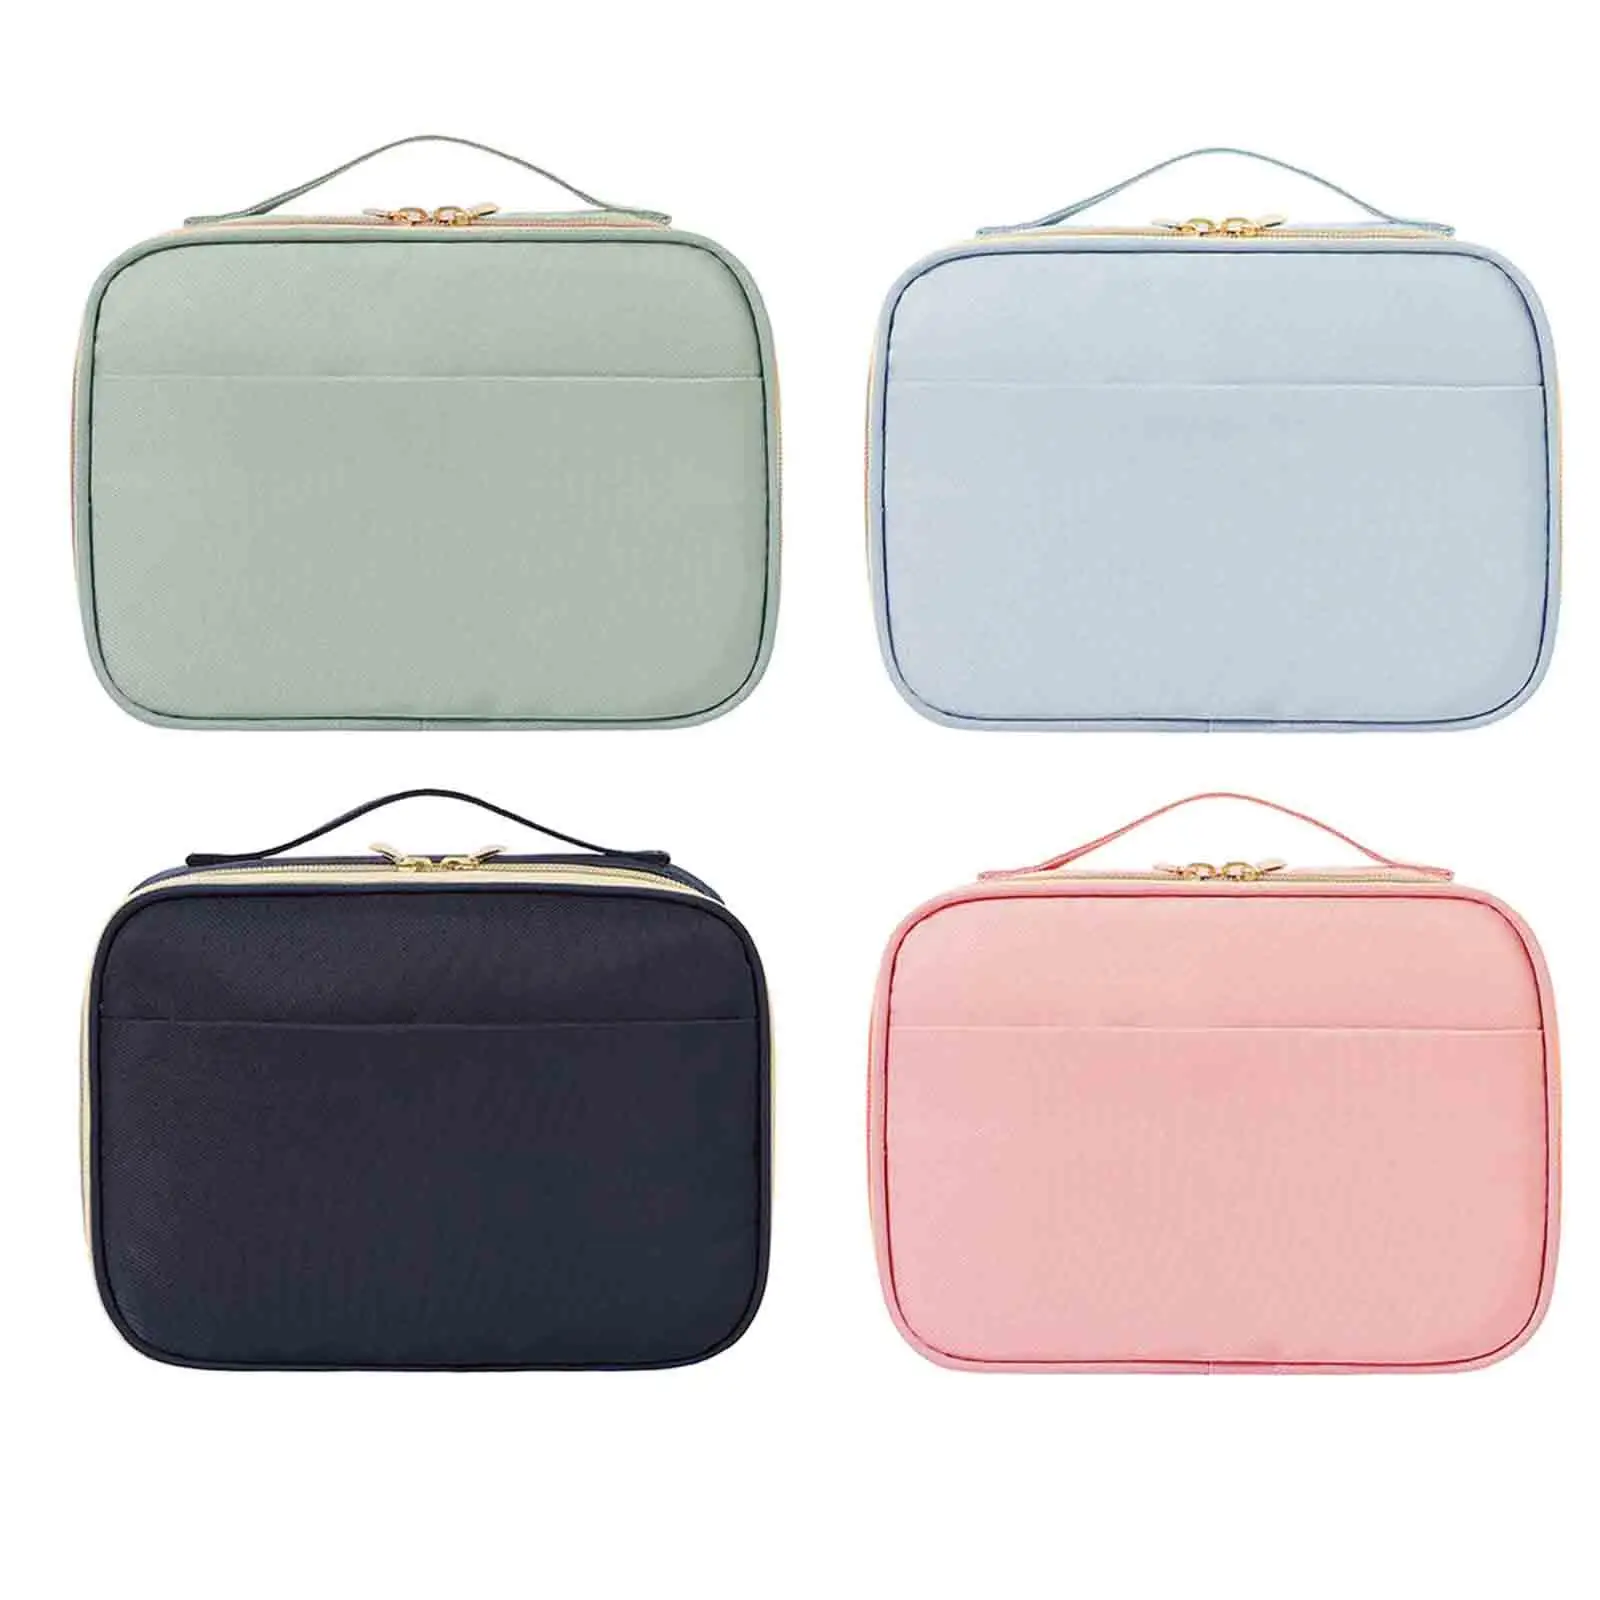 2 in 1 Makeup Bag Fashionable Stylish Cosmetics Hygiene Bag Container Travel Toiletry Bag Shower Organizer Kit for Women Girls